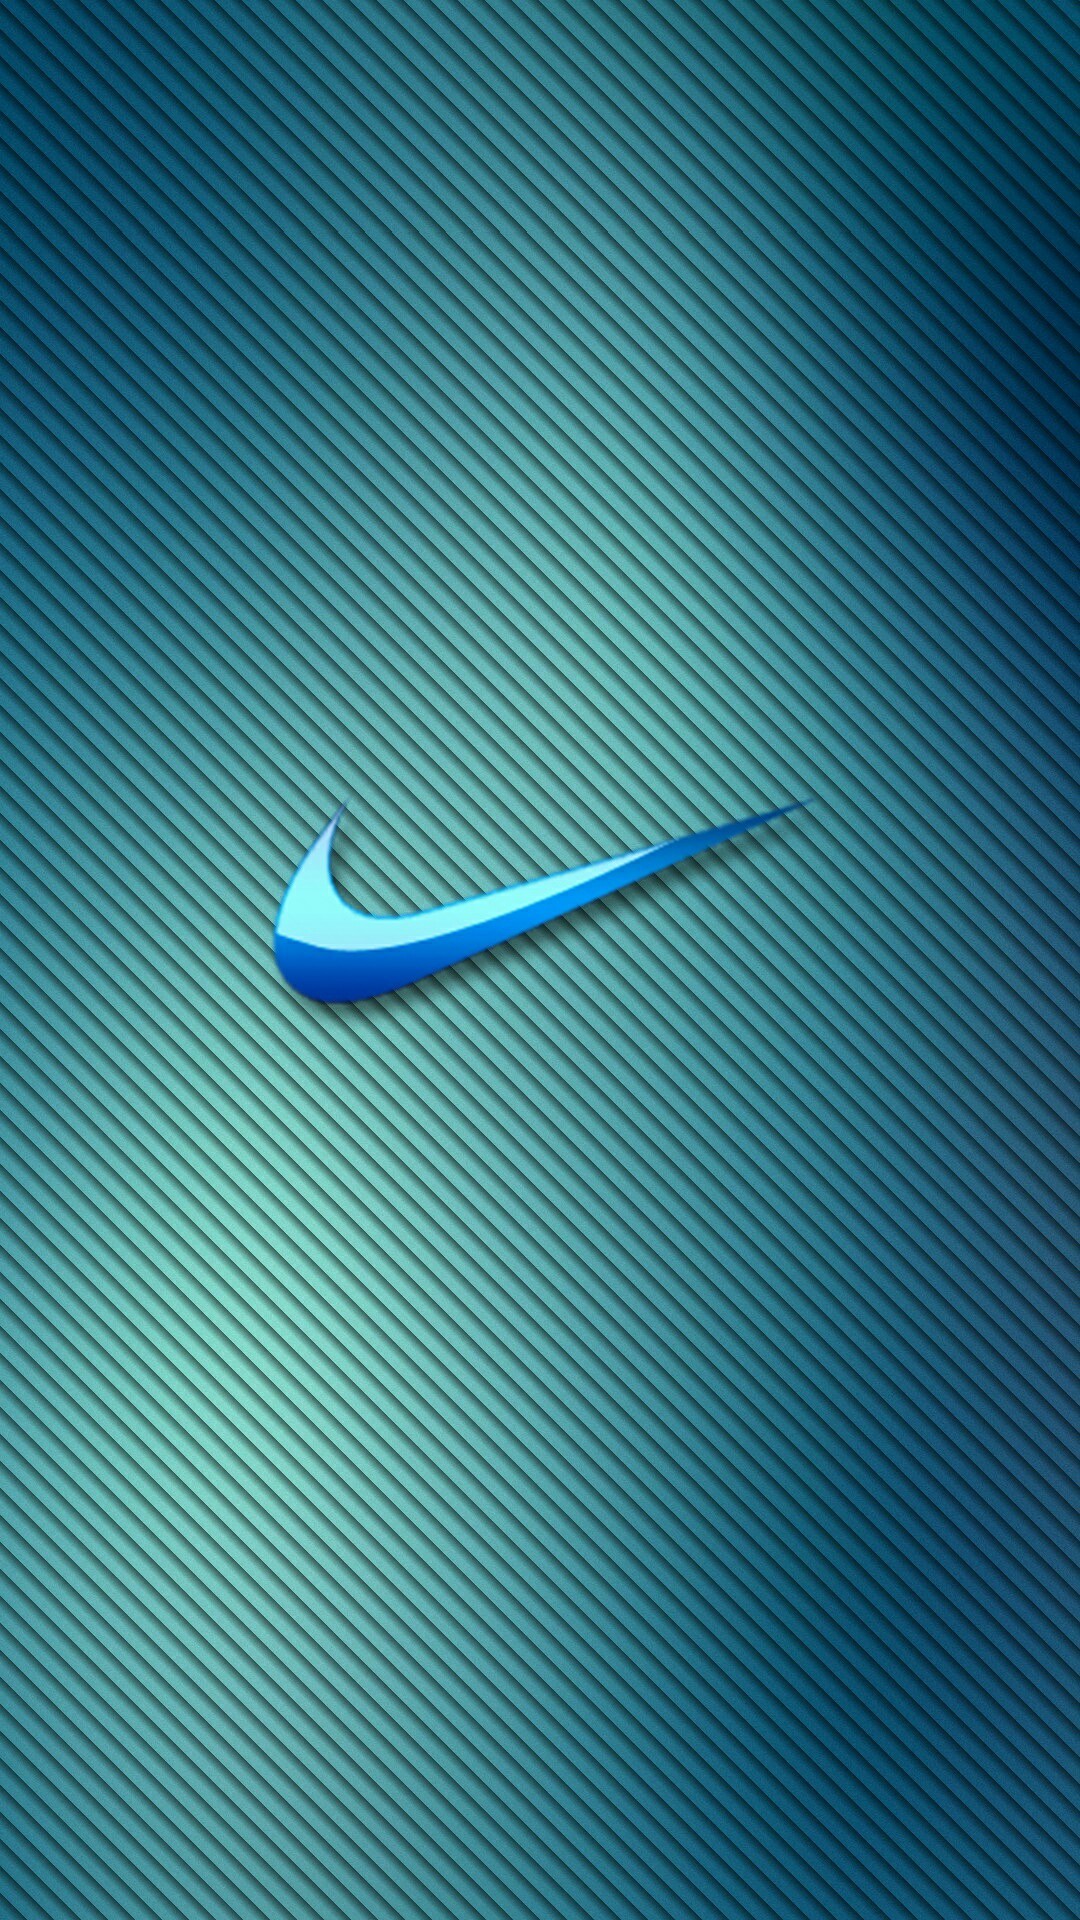 Nike Wallpaper for iPhone (79+ images)